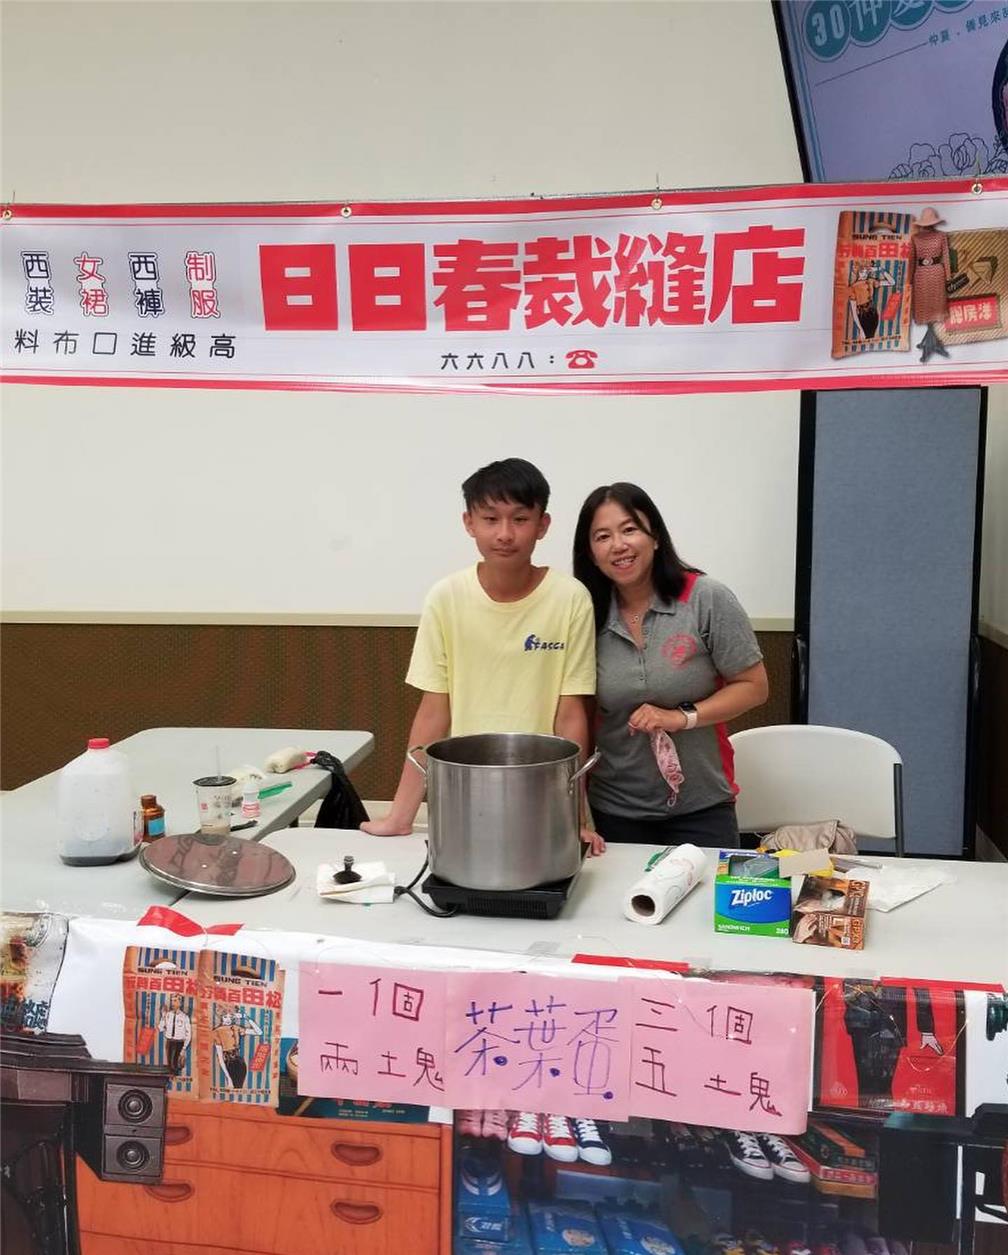 Presenting a creative Taiwanese food stand in an event.-1.